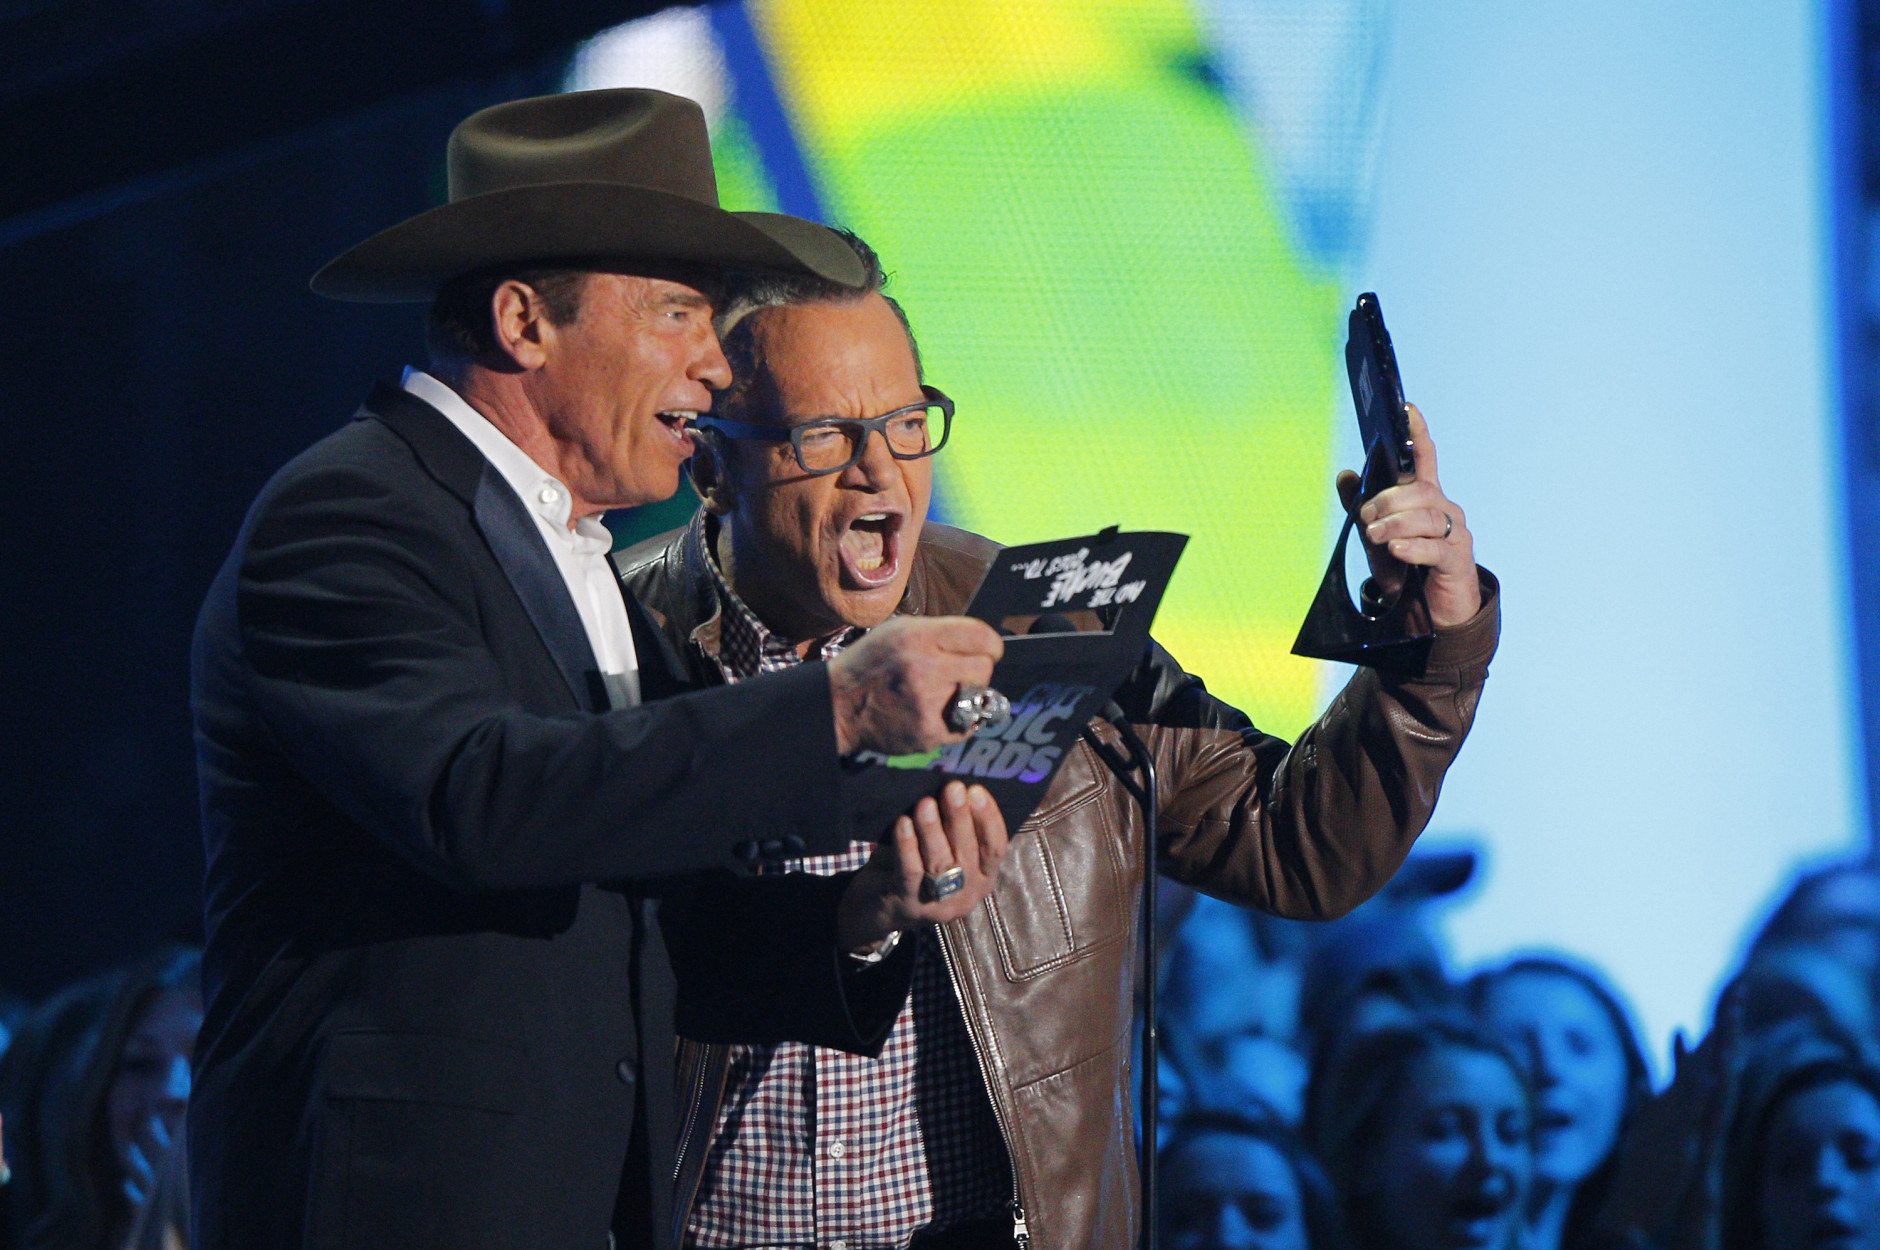 Tom Arnold, right, and Arnold Schwarzenegger present the award for video of the yea rat the CMT Music Awards at Bridgestone Arena on Wednesday, June 10, 2015, in Nashville, Tenn. (Photo by Wade Payne/Invision/AP)